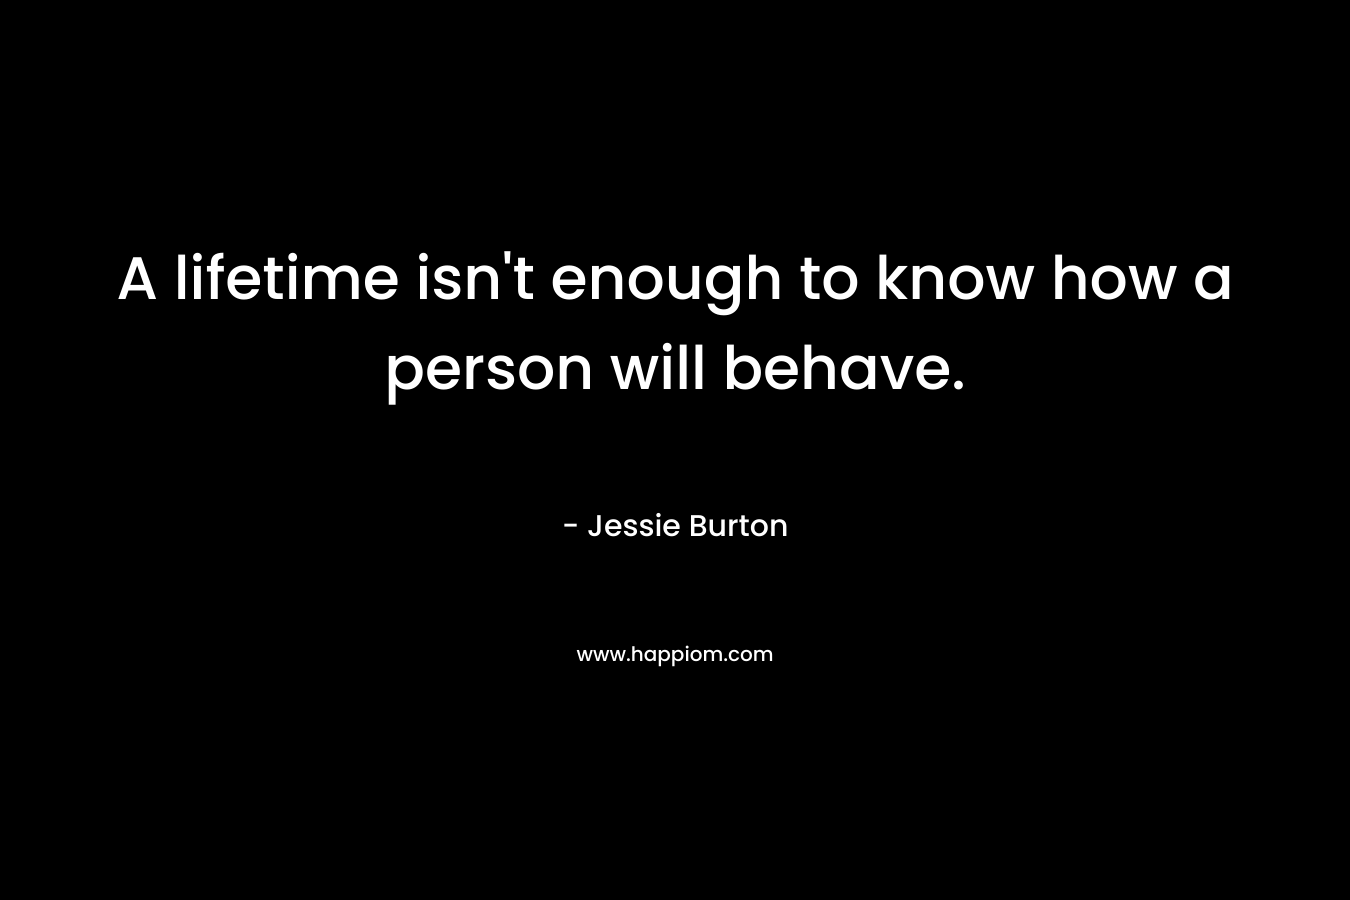 A lifetime isn’t enough to know how a person will behave. – Jessie Burton